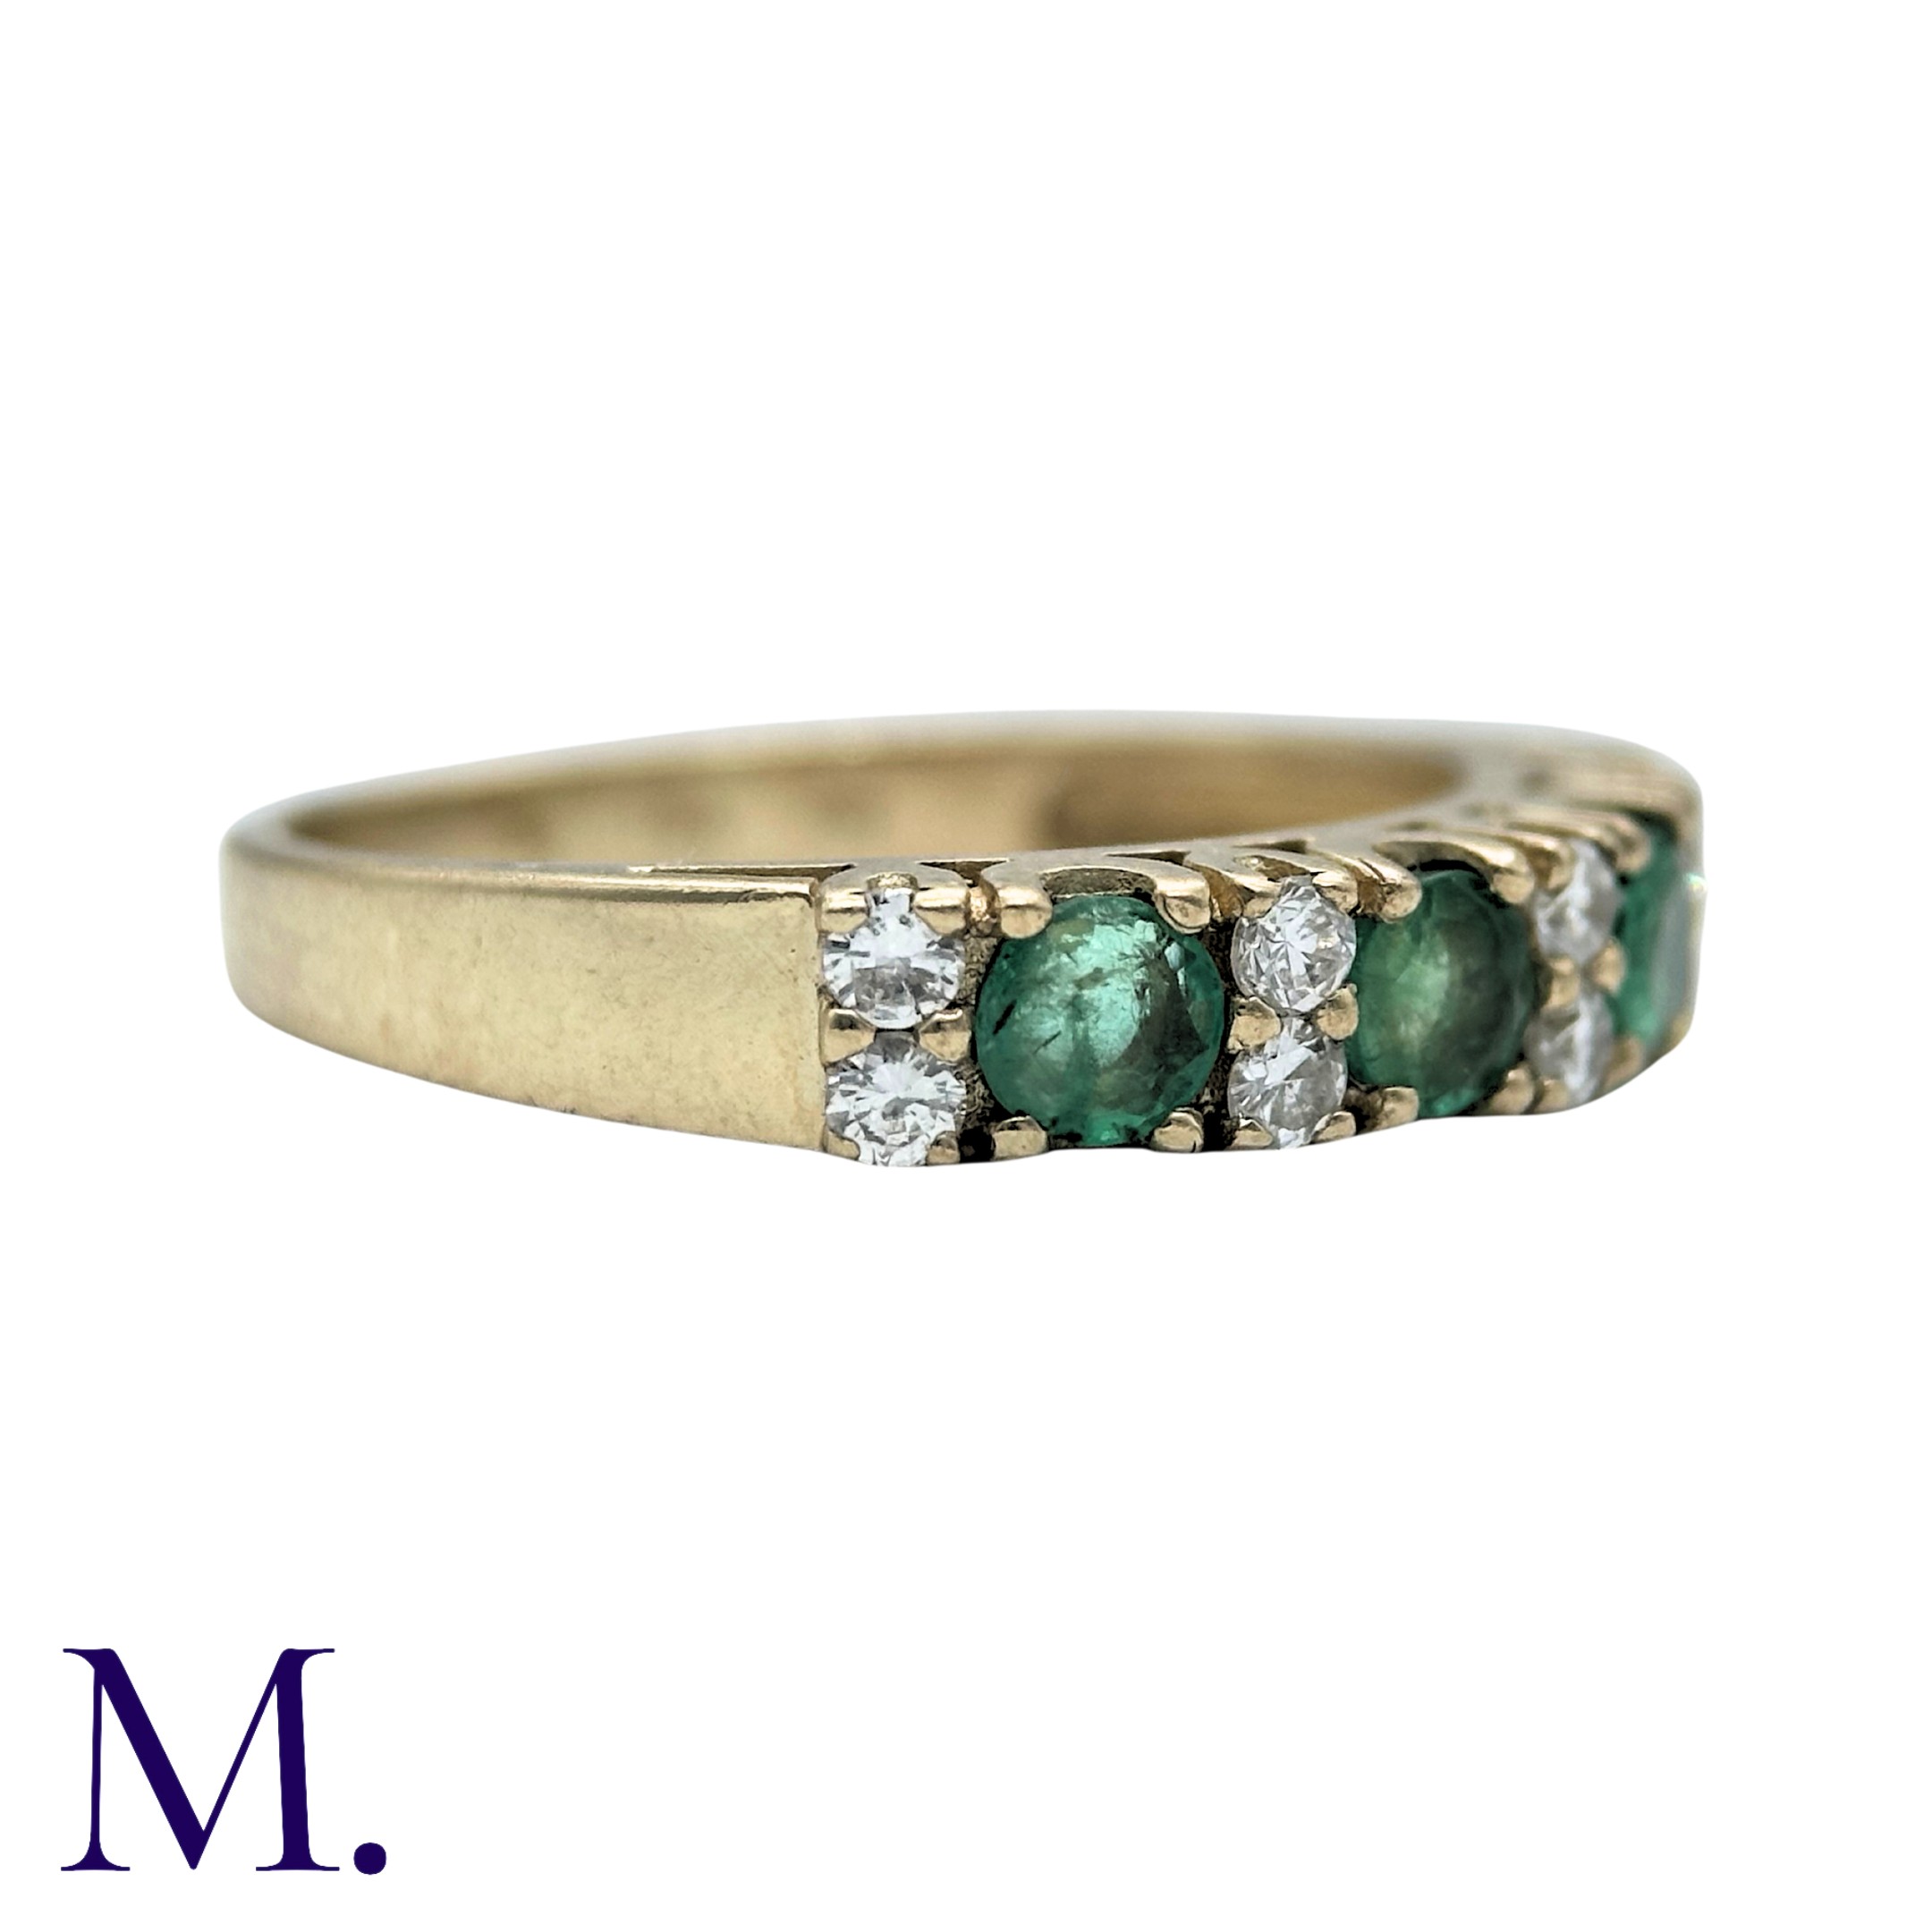 An Emerald And Diamond Ring in 9k yellow gold, set with four round cut emeralds punctuated with - Image 4 of 6